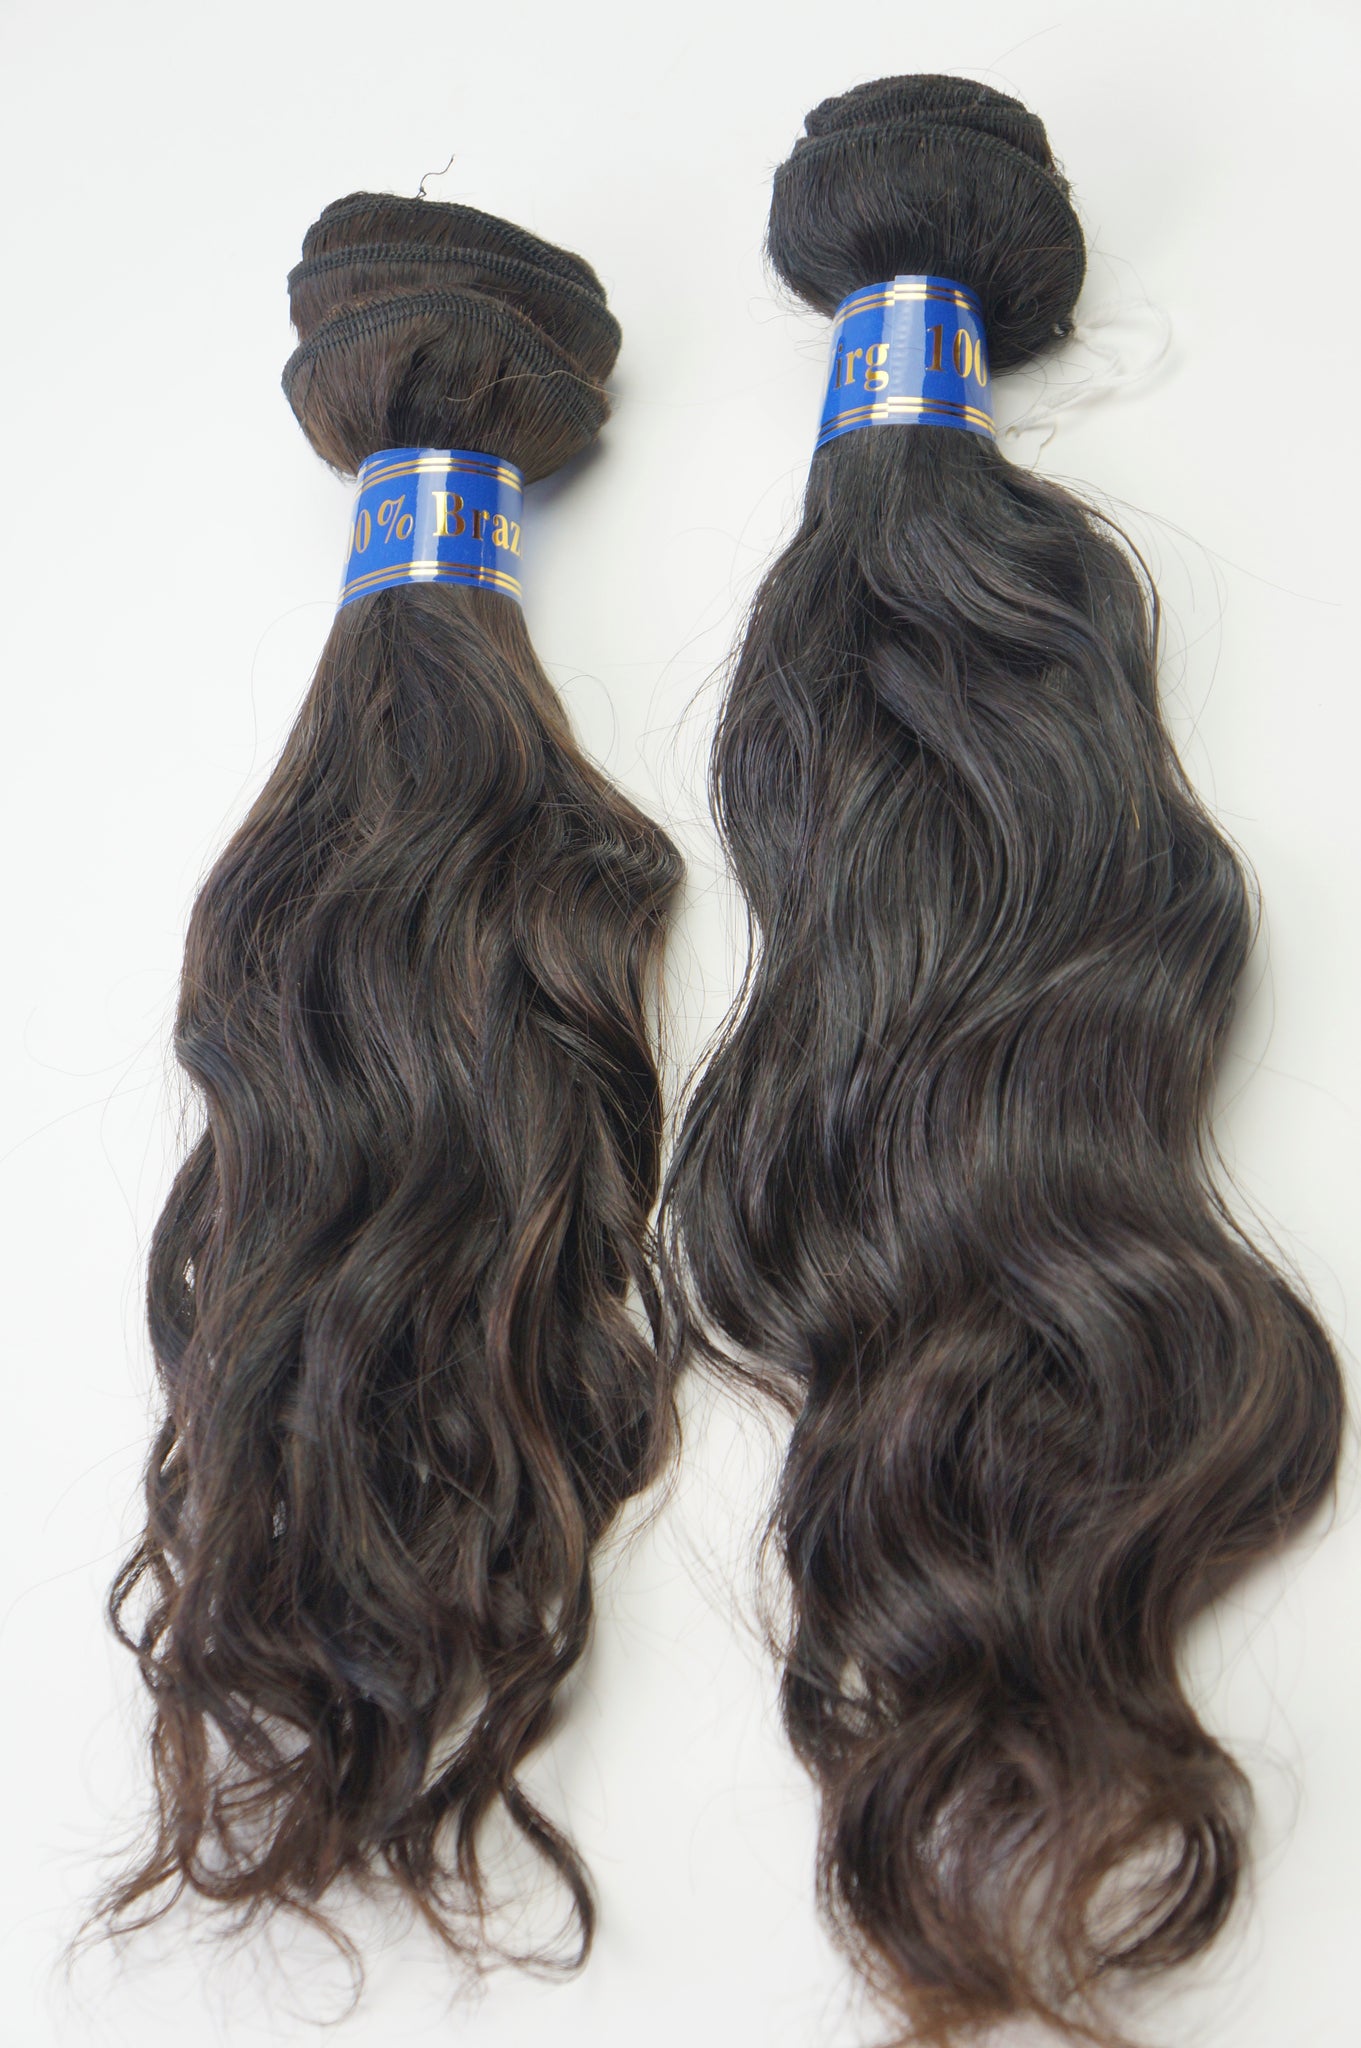 Virgin Cuticle Wavy - Lace Front Wig